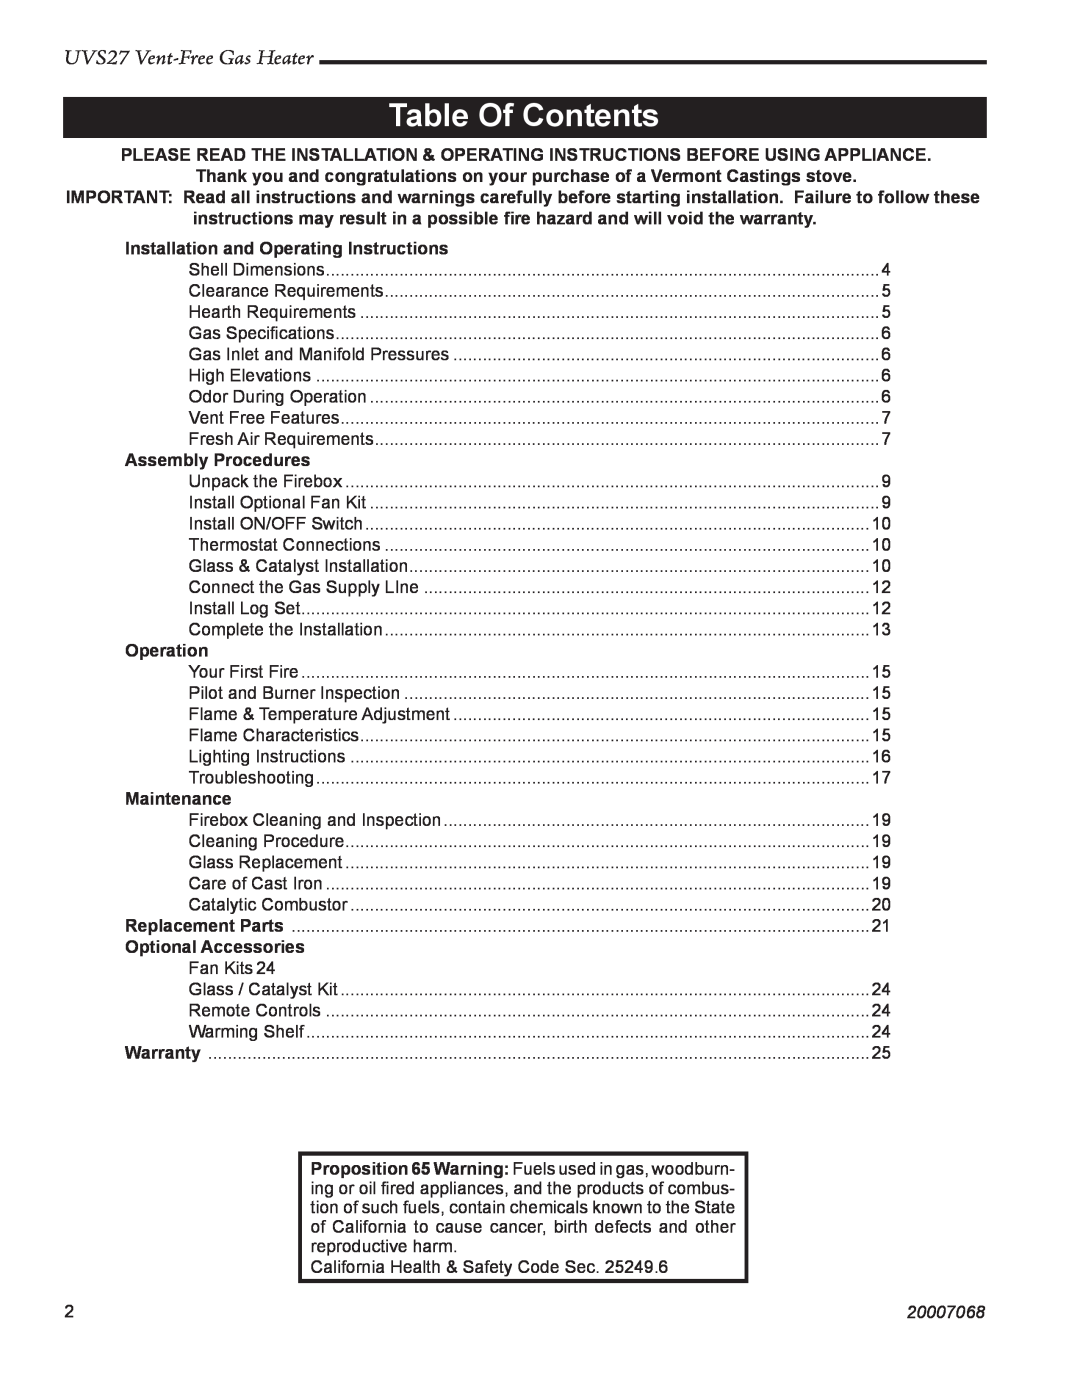 Vermont Casting 4030 - 4049 manual Table Of Contents, UVS27 Vent-FreeGas Heater, Installation and Operating Instructions 